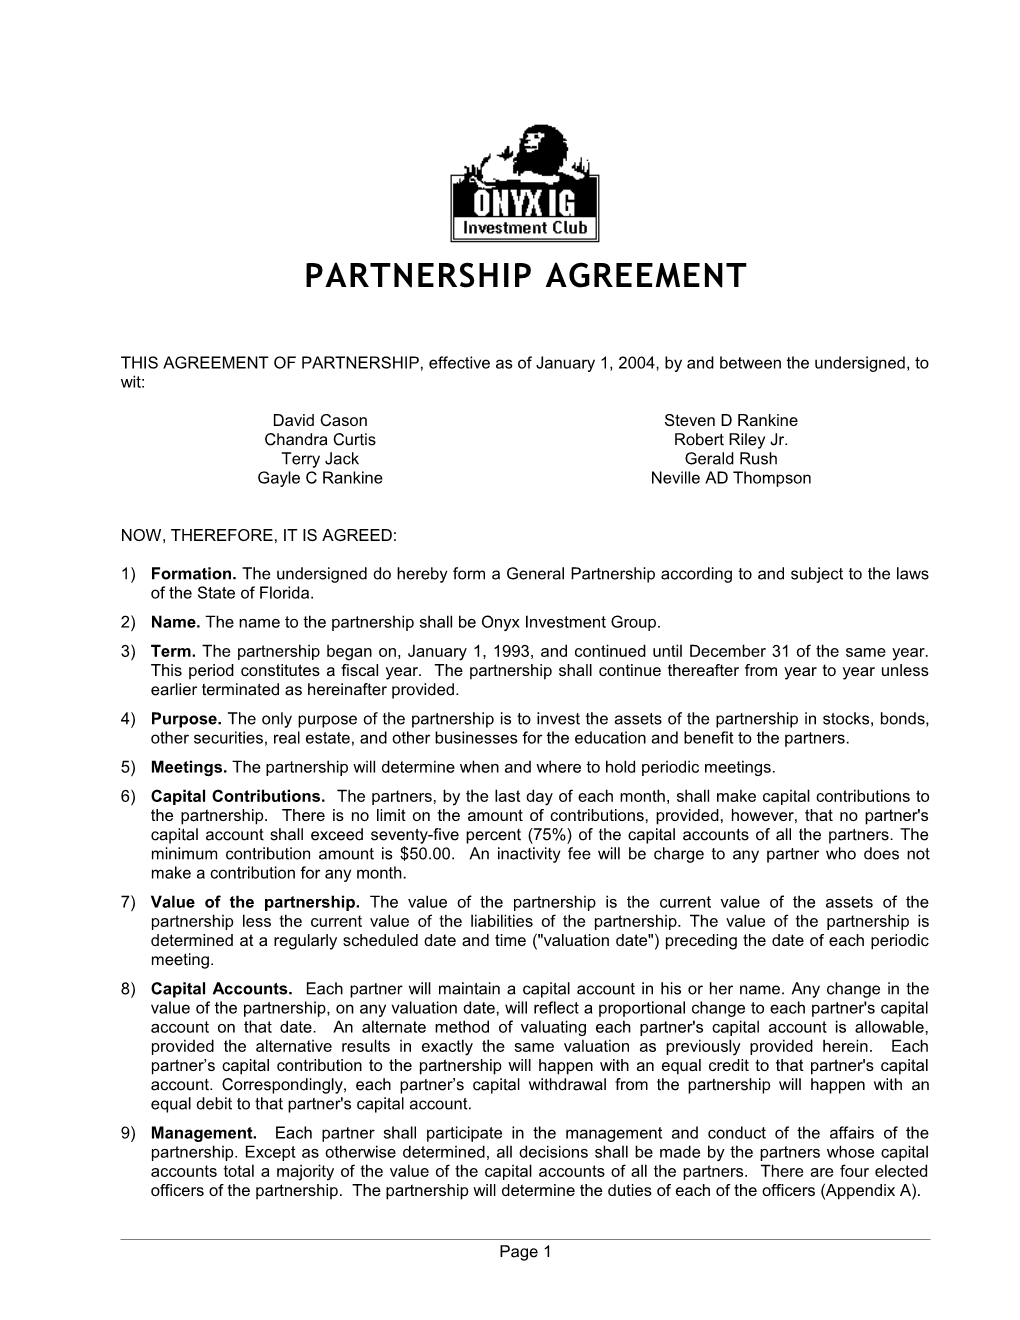 Partnership Agreement of Onyx Investment Group